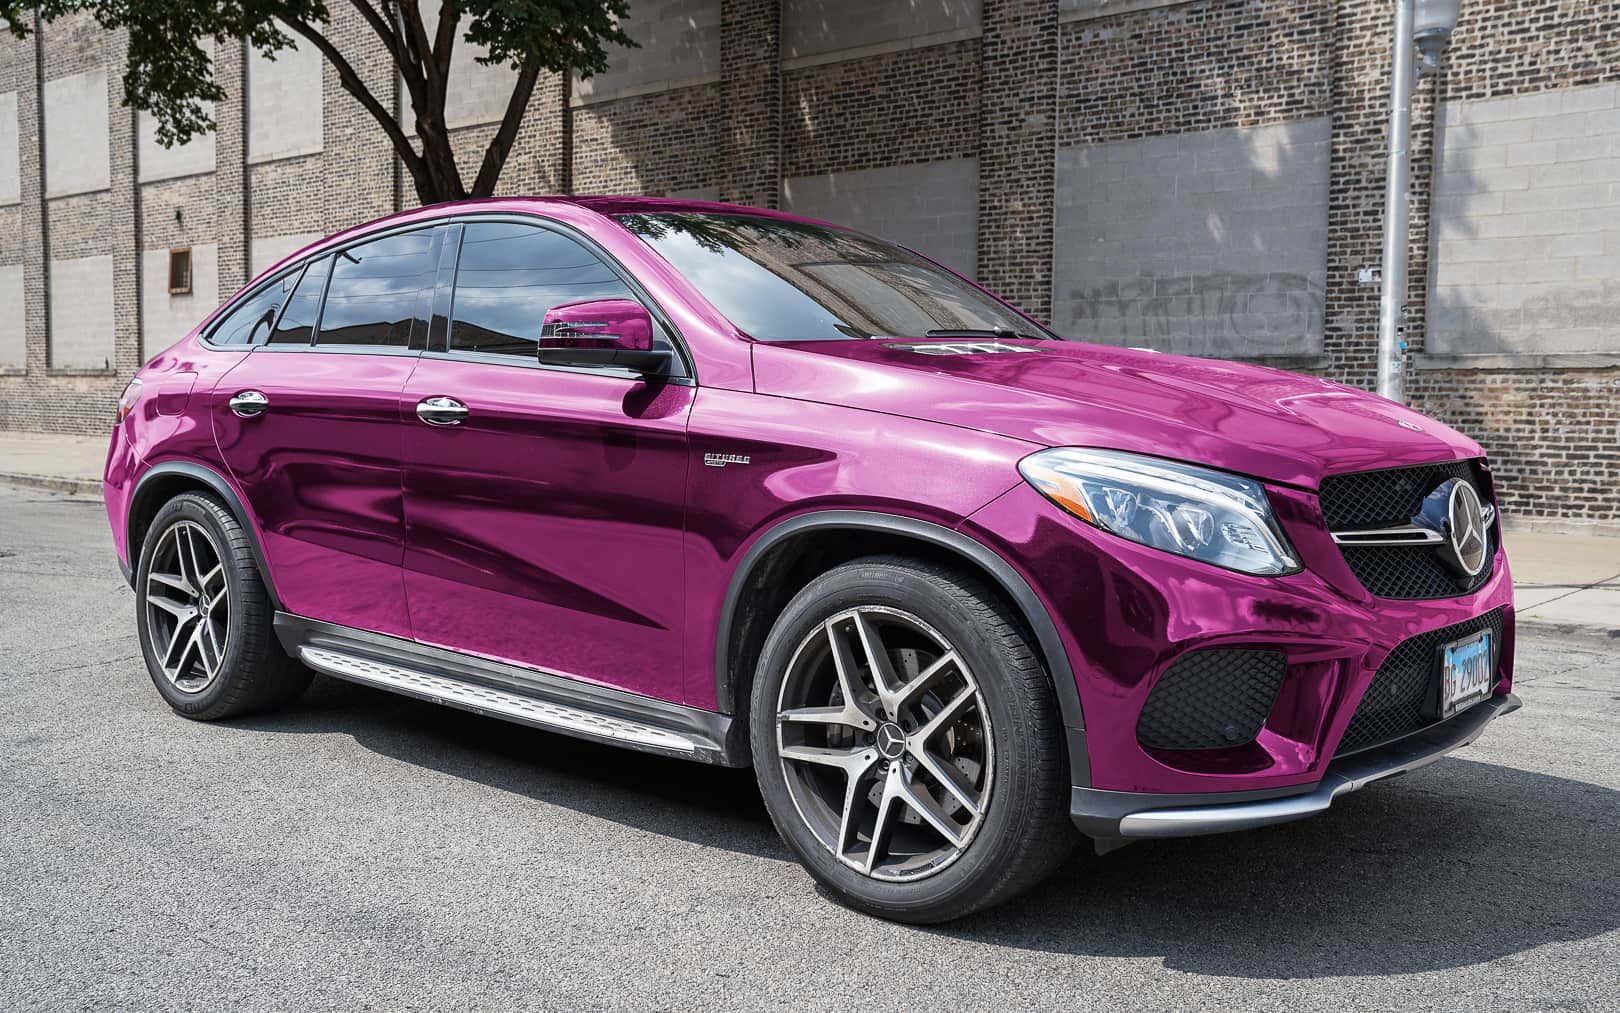 Get the Pink Vinyl Wrap & Turn Your Ride into a True Wonder!